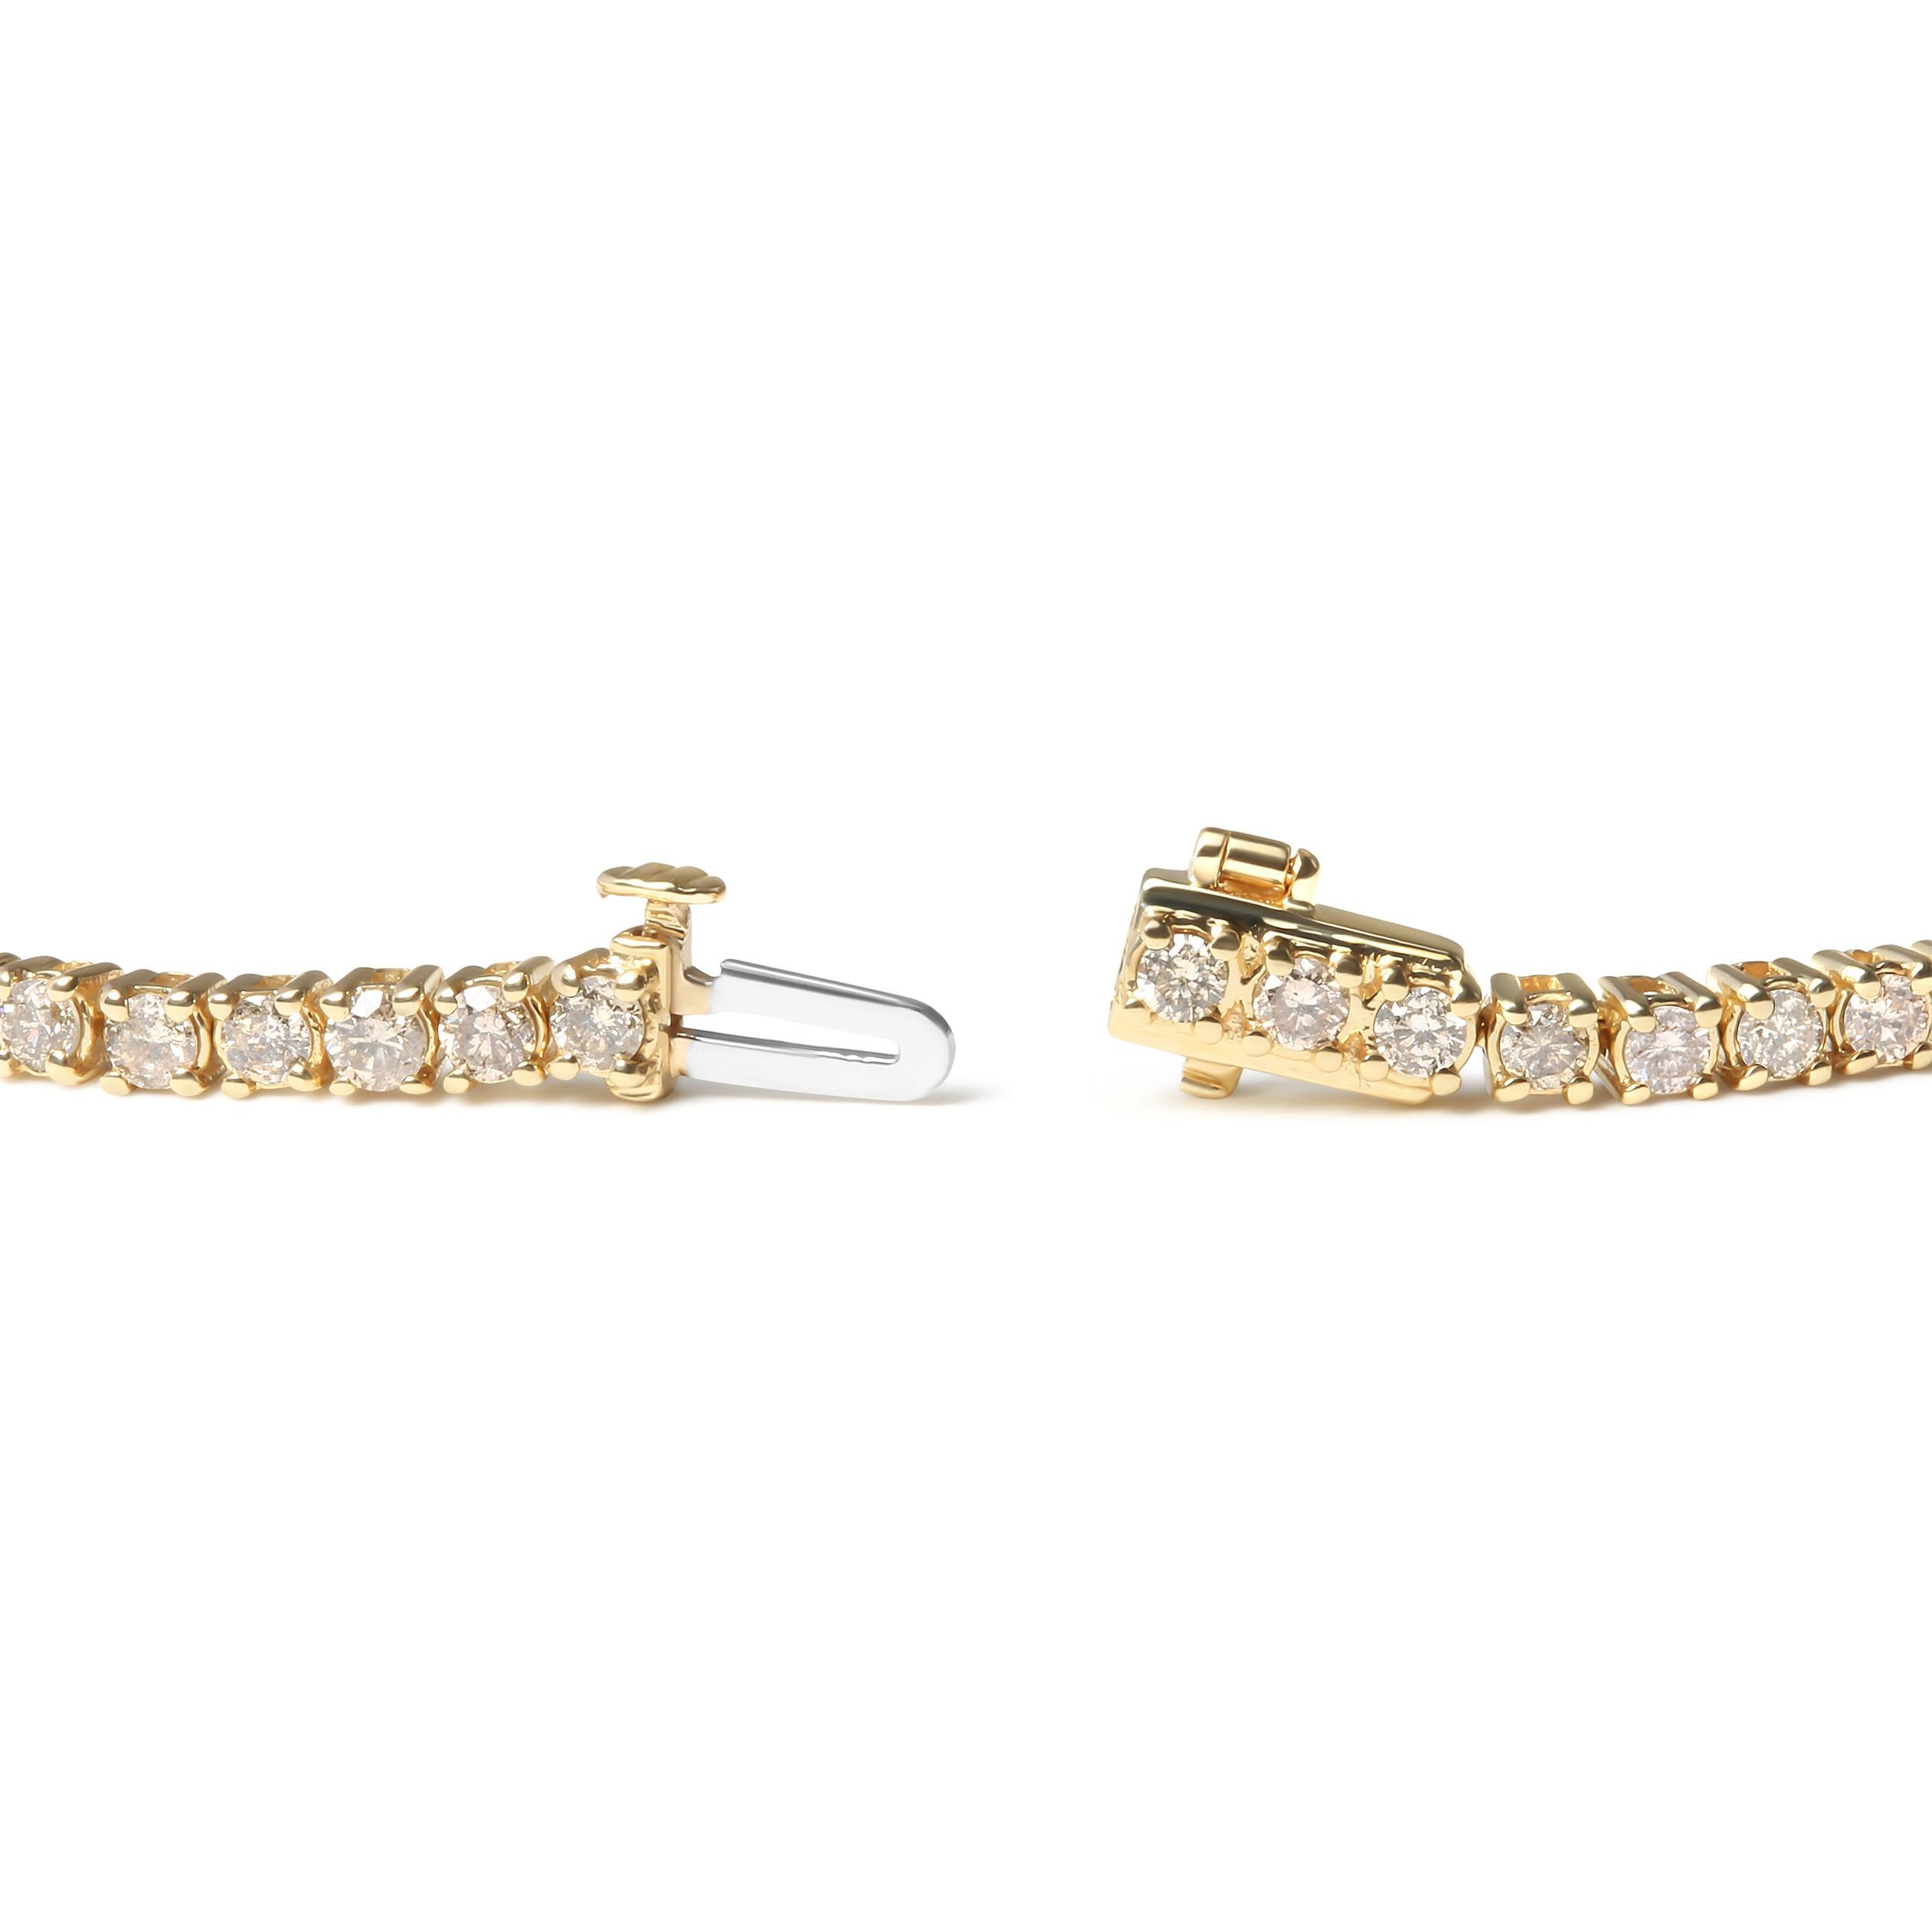 Adorn your wrist with the timeless elegance of our 14K Yellow Gold Diamond Tennis Bracelet. Featuring a stunning array of 62 round brilliant-cut natural diamonds, totaling 6.0 carats, this bracelet is a luxurious statement piece perfect for any